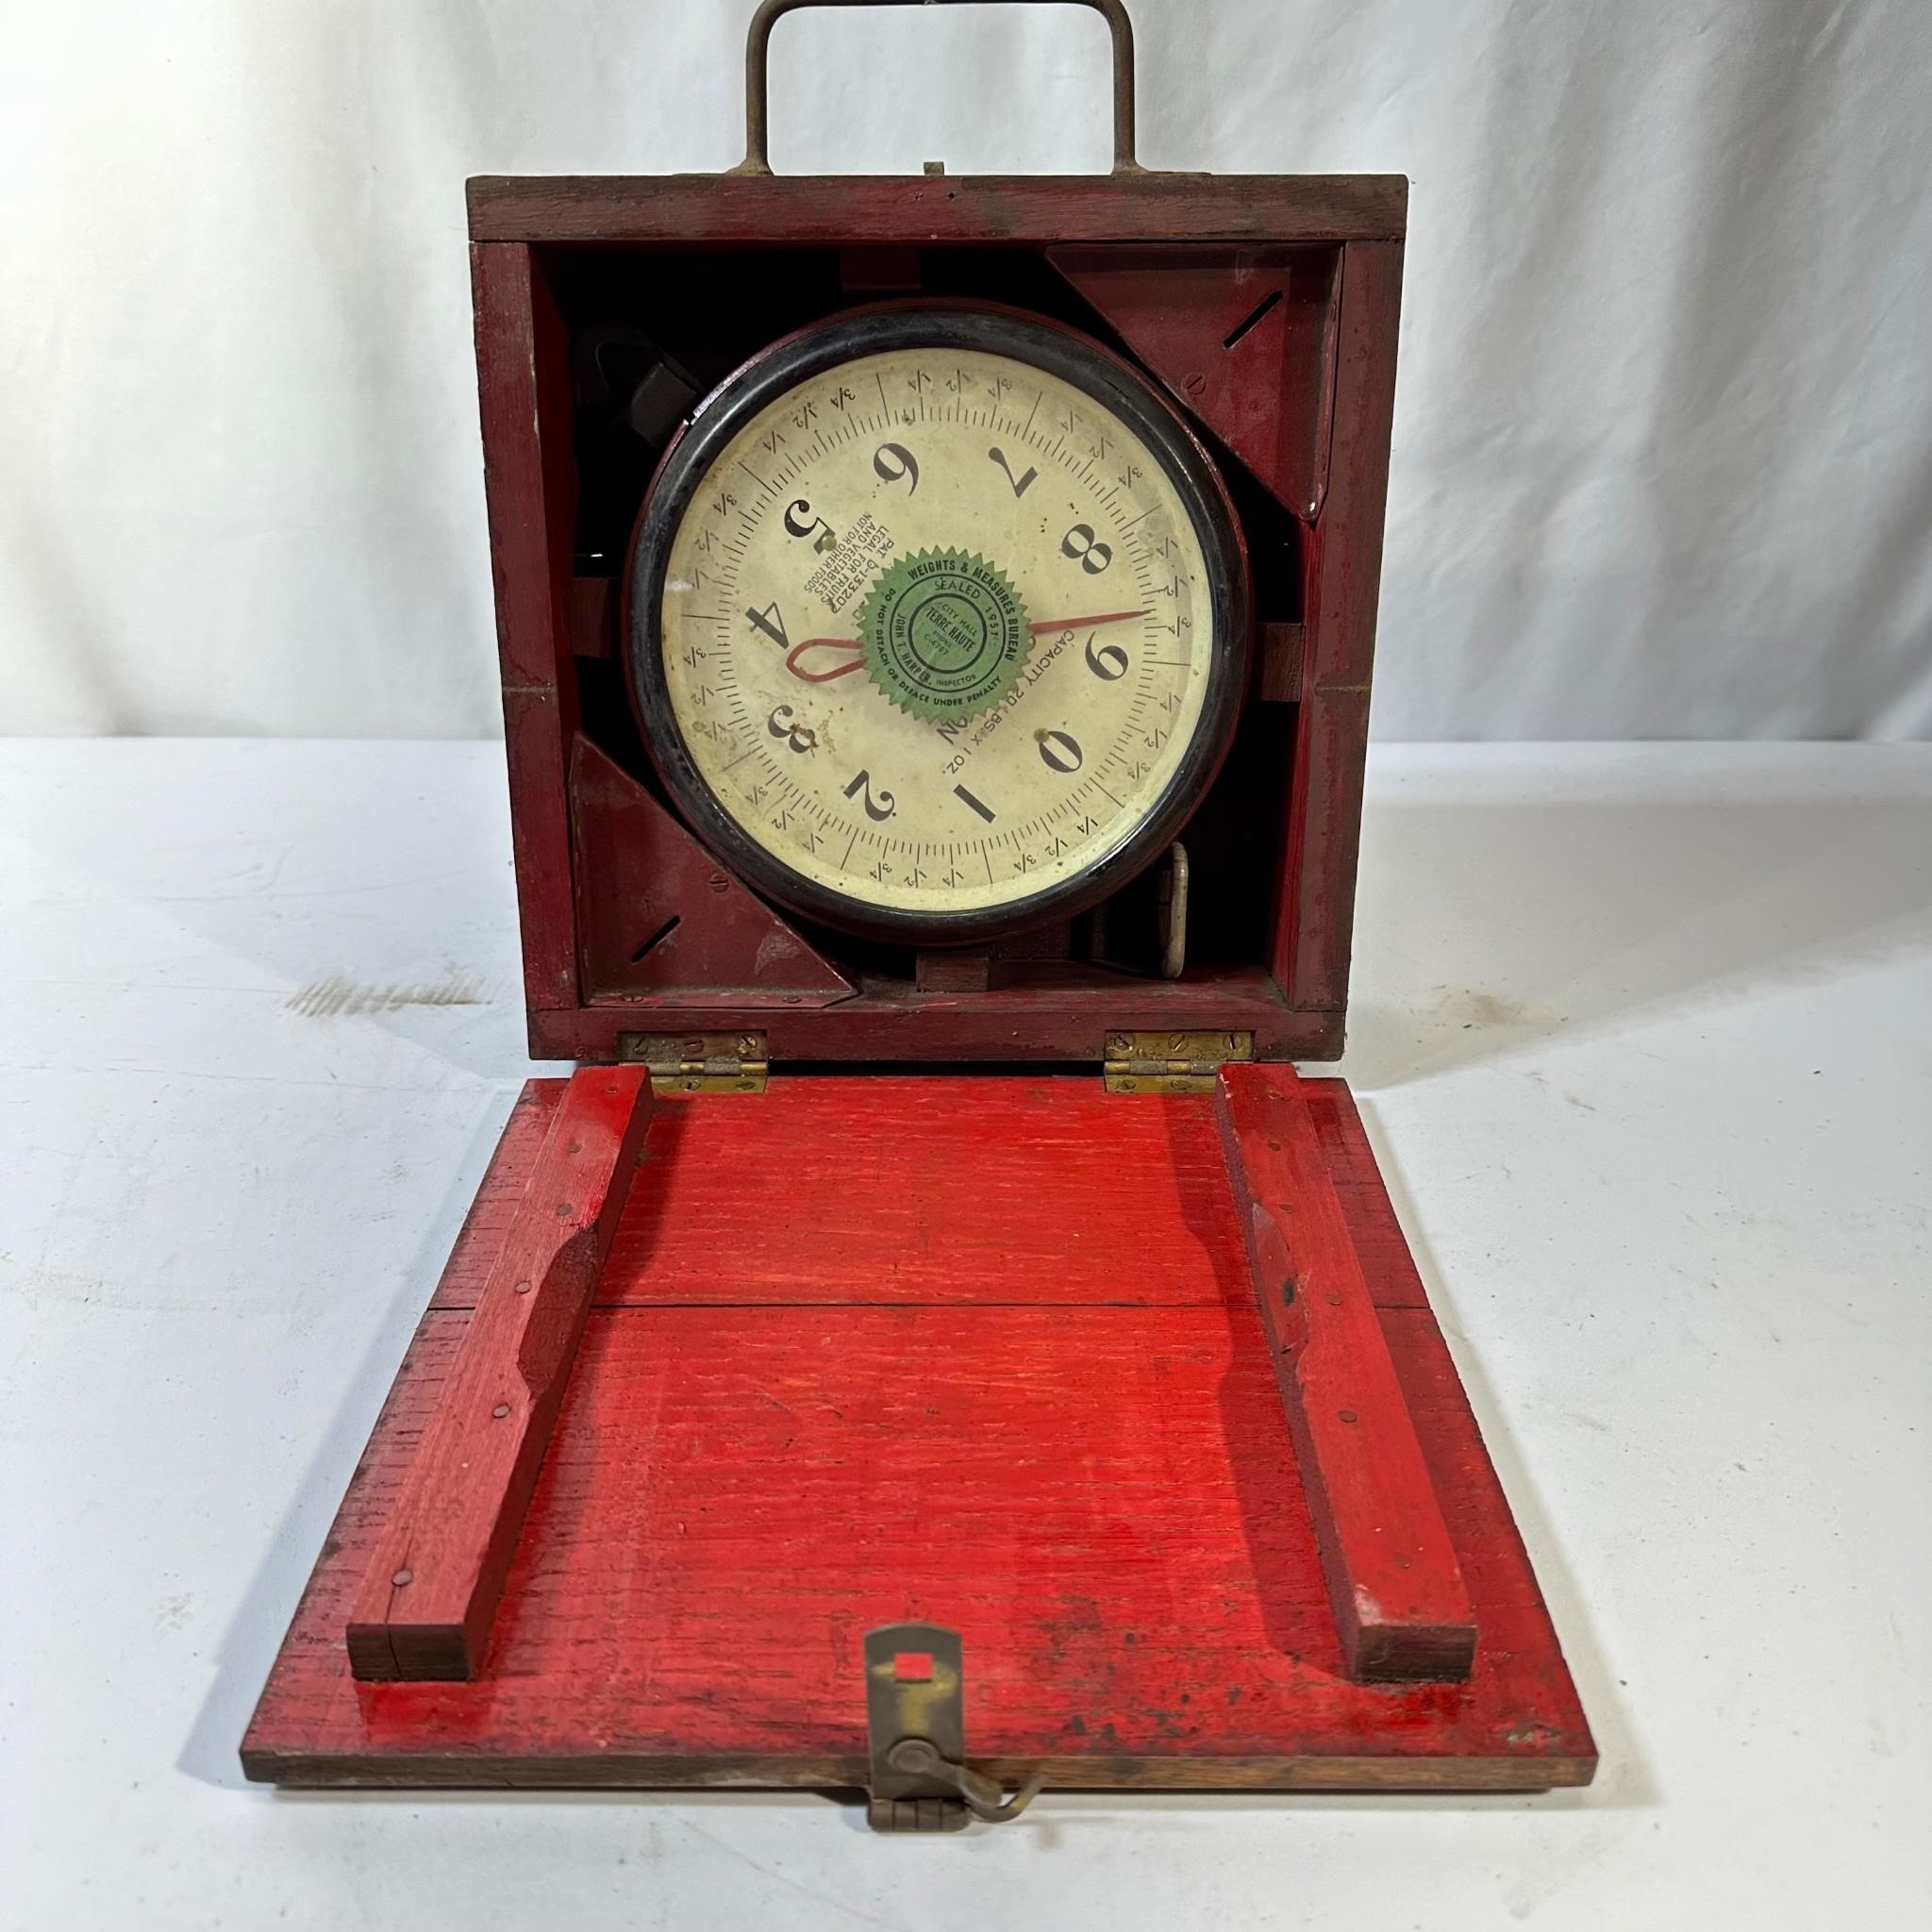 Chatillon Scale With Wooden Case